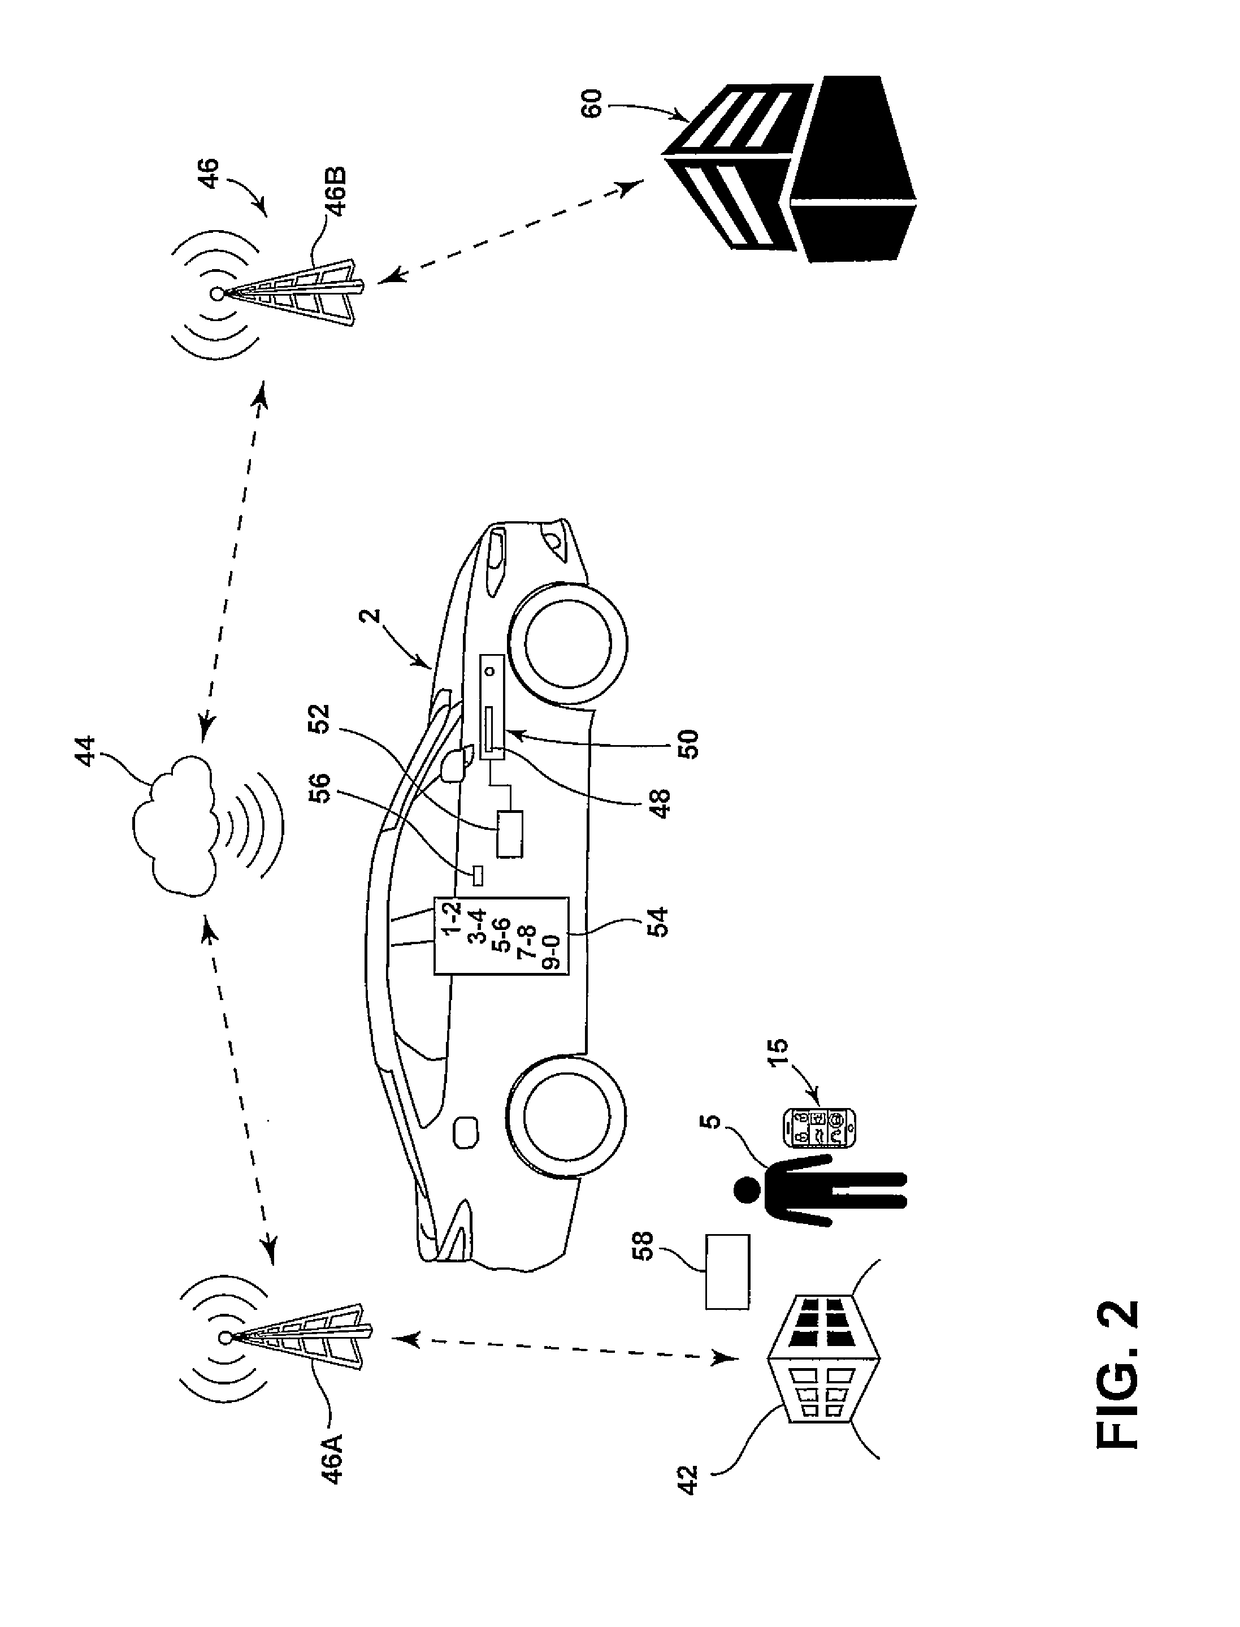 Keyless car sharing mechanism using smartphones and inbuilt WiFi systems for authentication